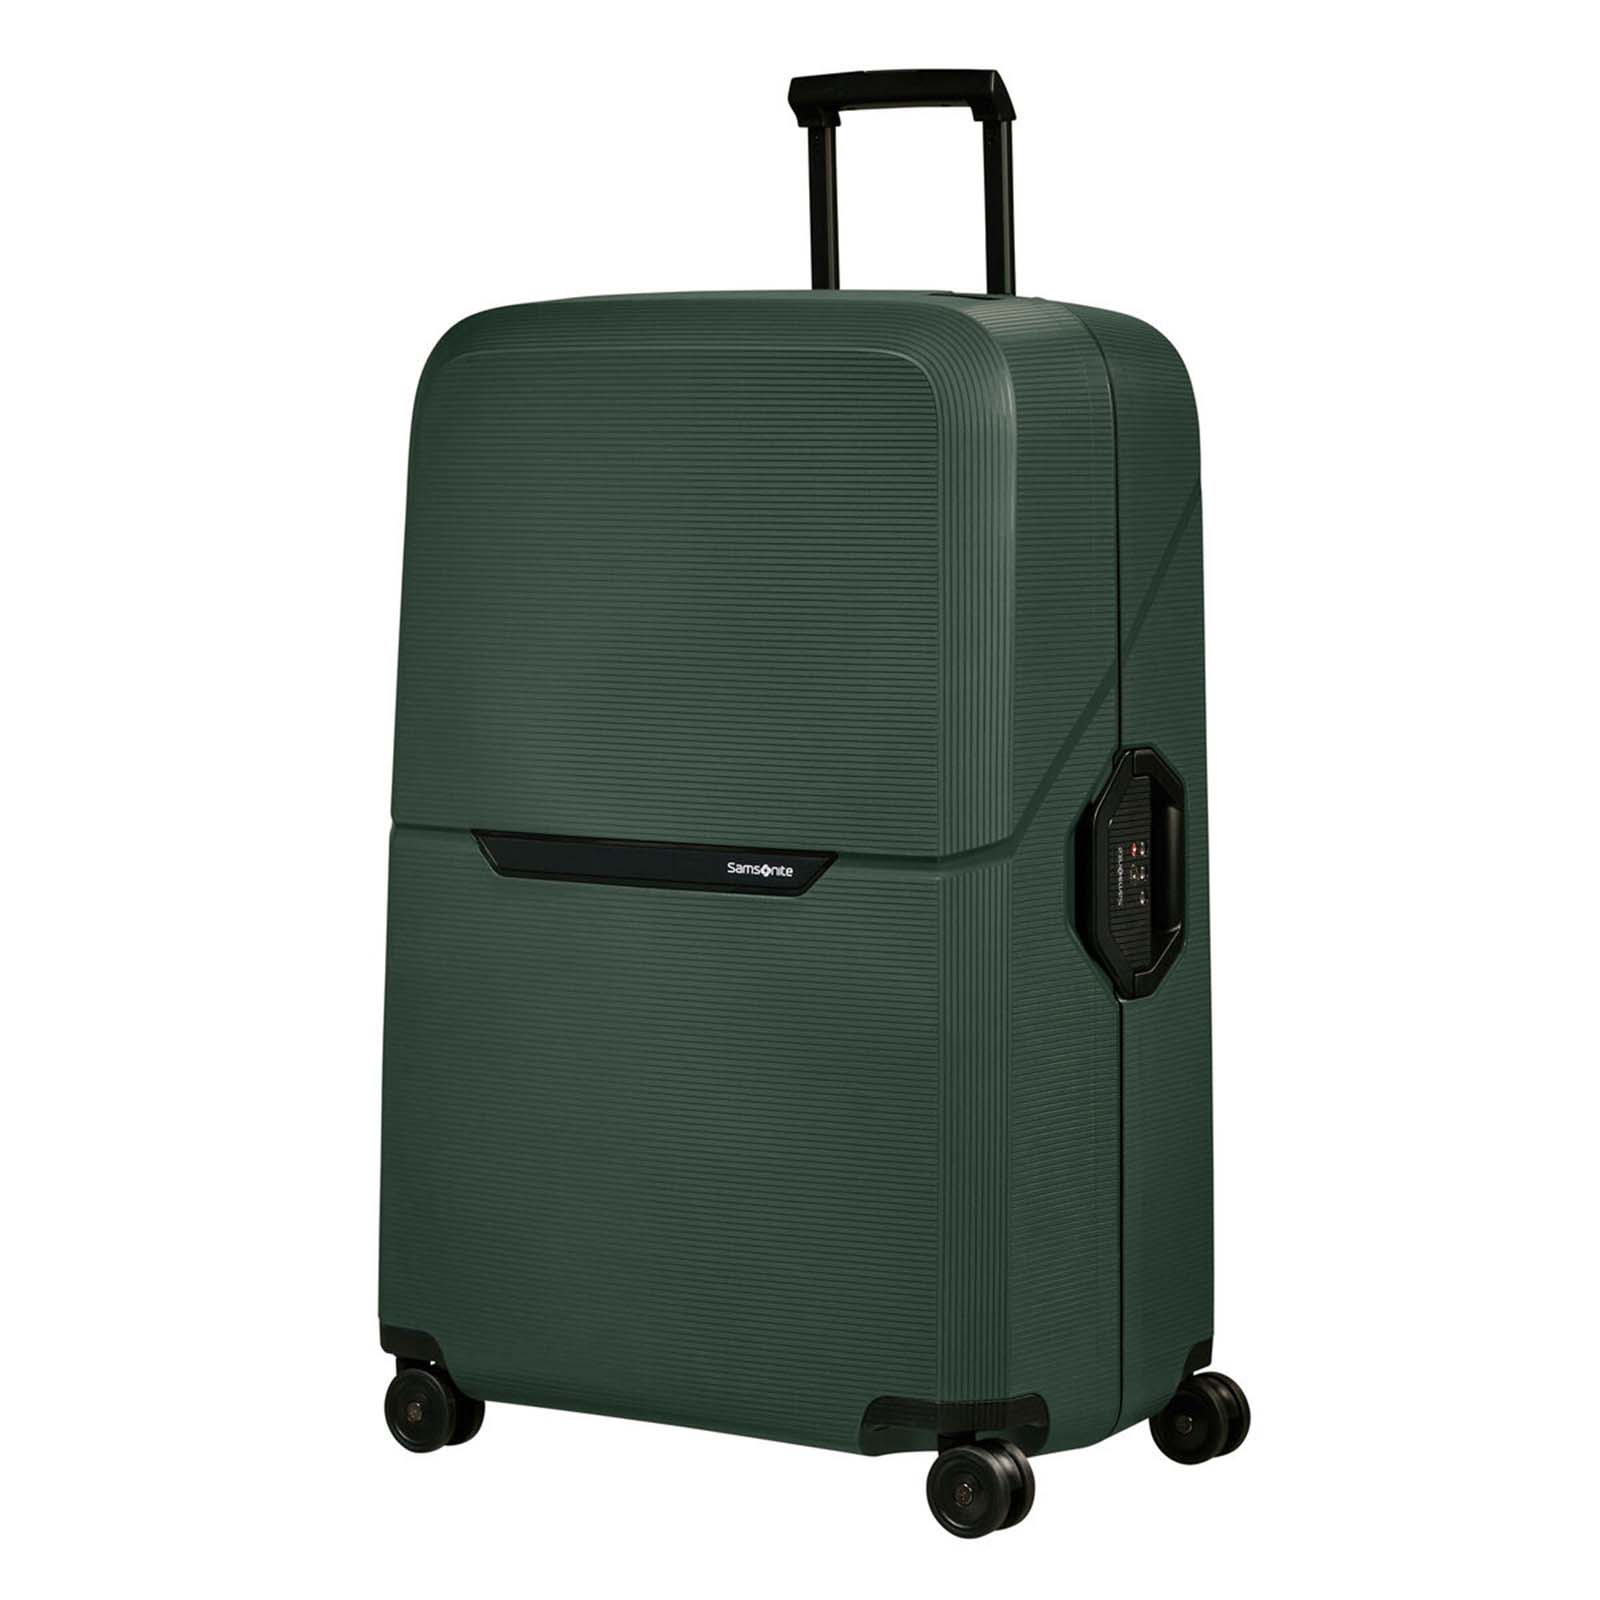 Samsonite-Magnum-Eco-81cm-Suitcase-Forest-Green-Front-Angle